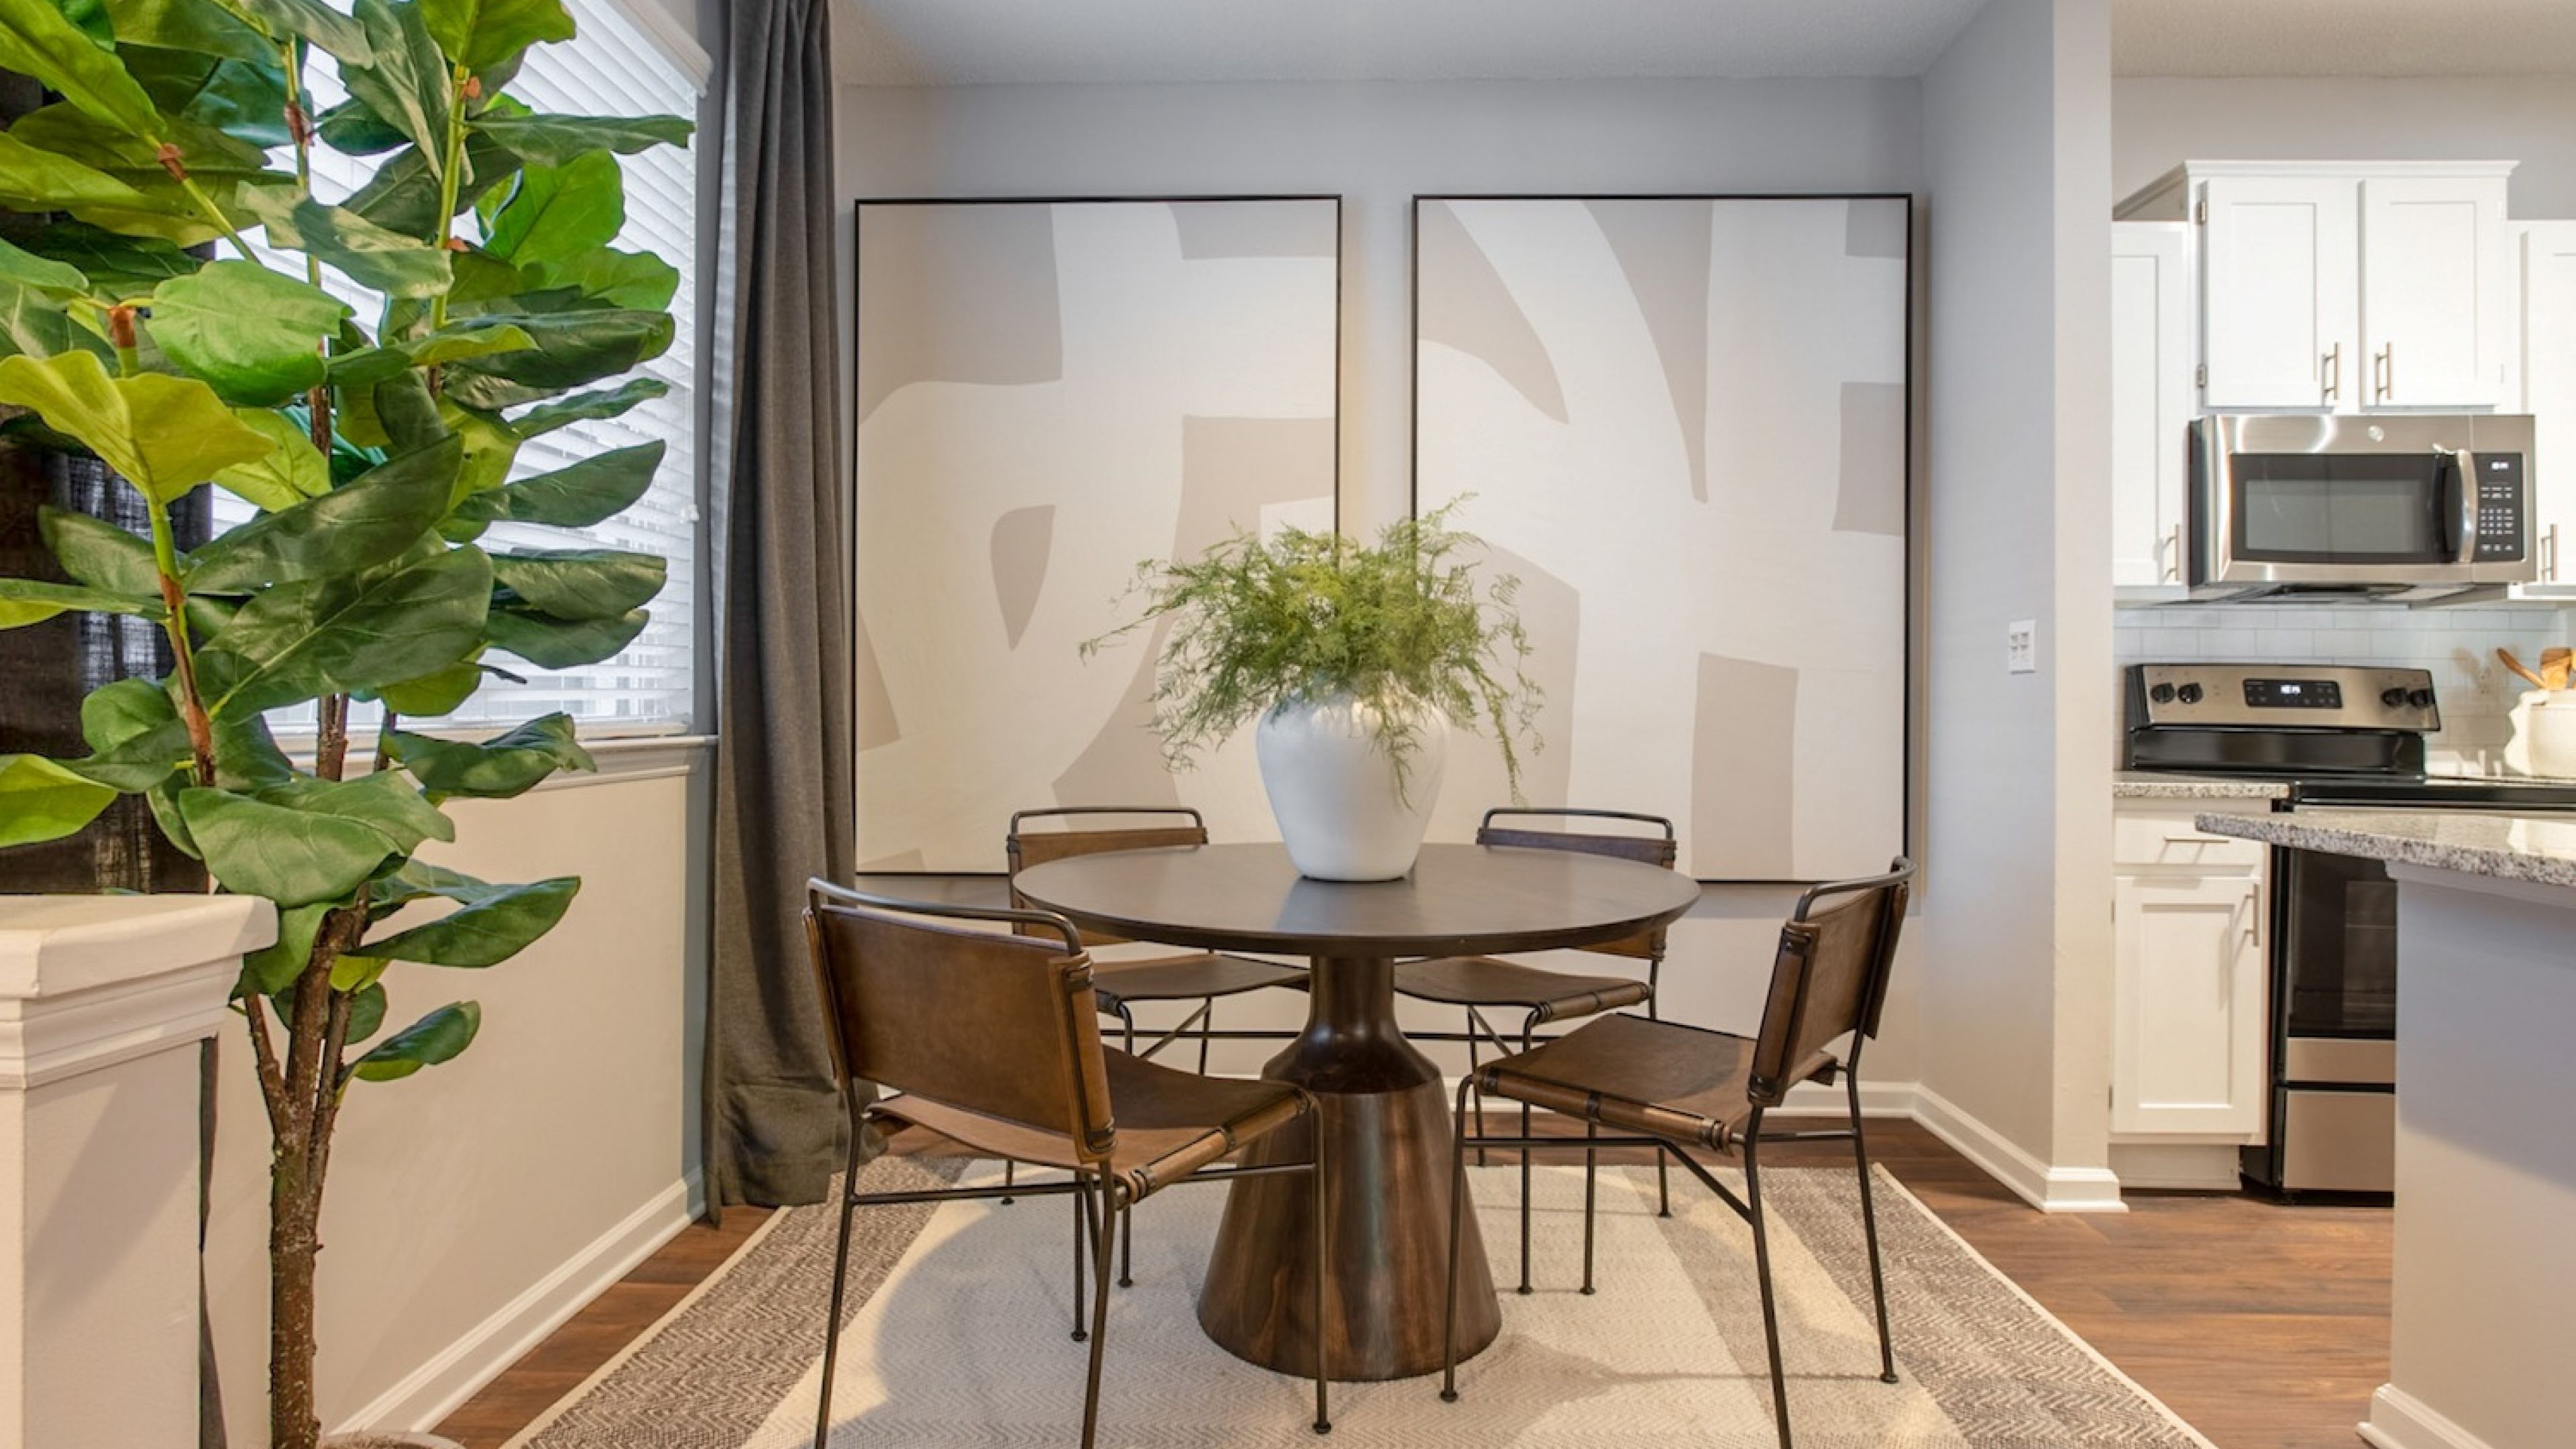 Hawthorne at the Parkway minimalist dining area with a round table and leather chairs, next to a modern kitchen and large leafy indoor plant.